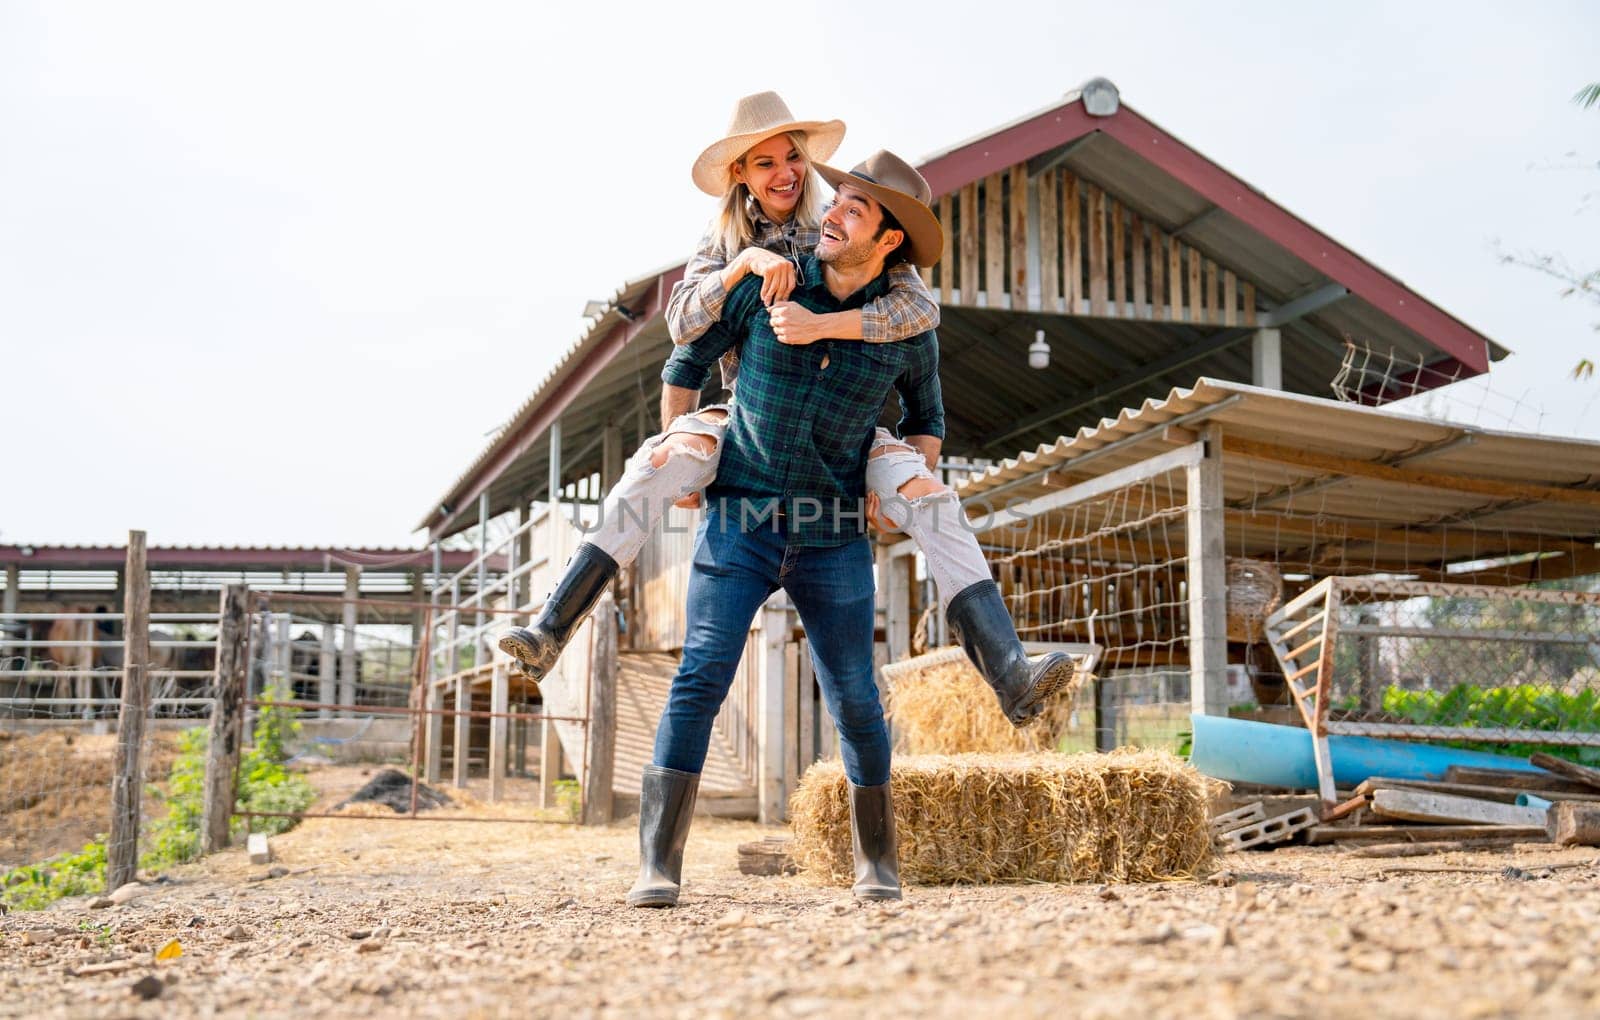 Caucasian man and woman farmer enjoy with woman riding on the back of man and go around the area of their farm with happiness and day light.